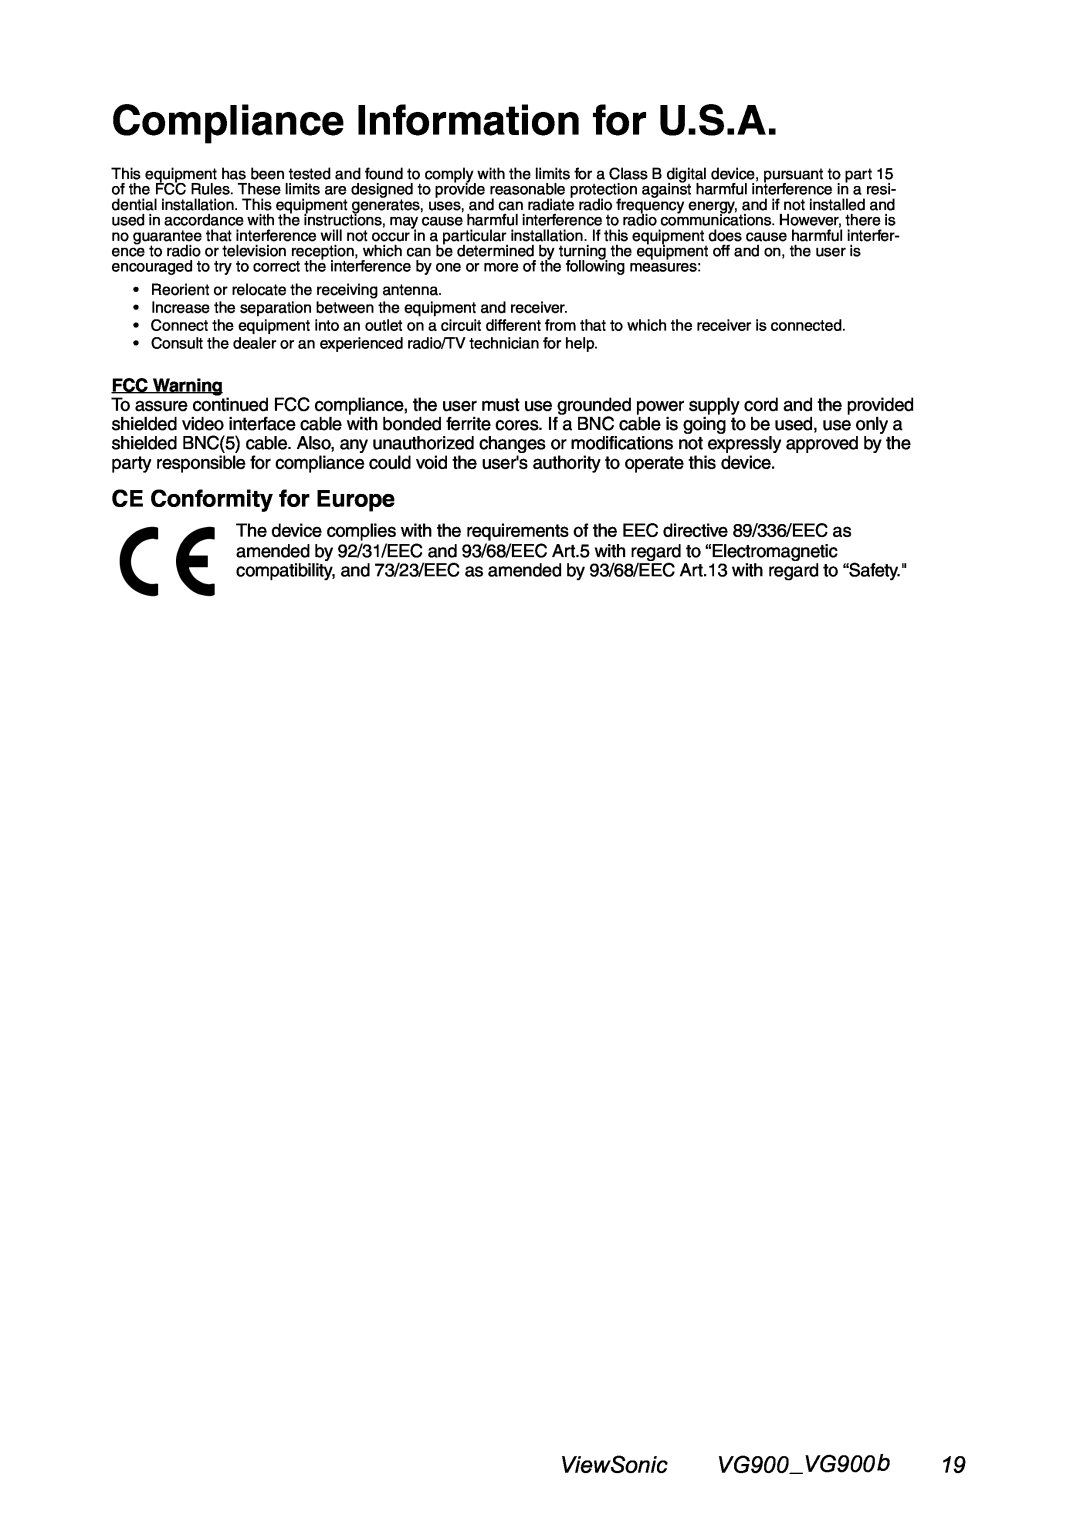 ViewSonic manual Compliance Information for U.S.A, CE Conformity for Europe, ViewSonic VG900 VG900 b, FCC Warning 